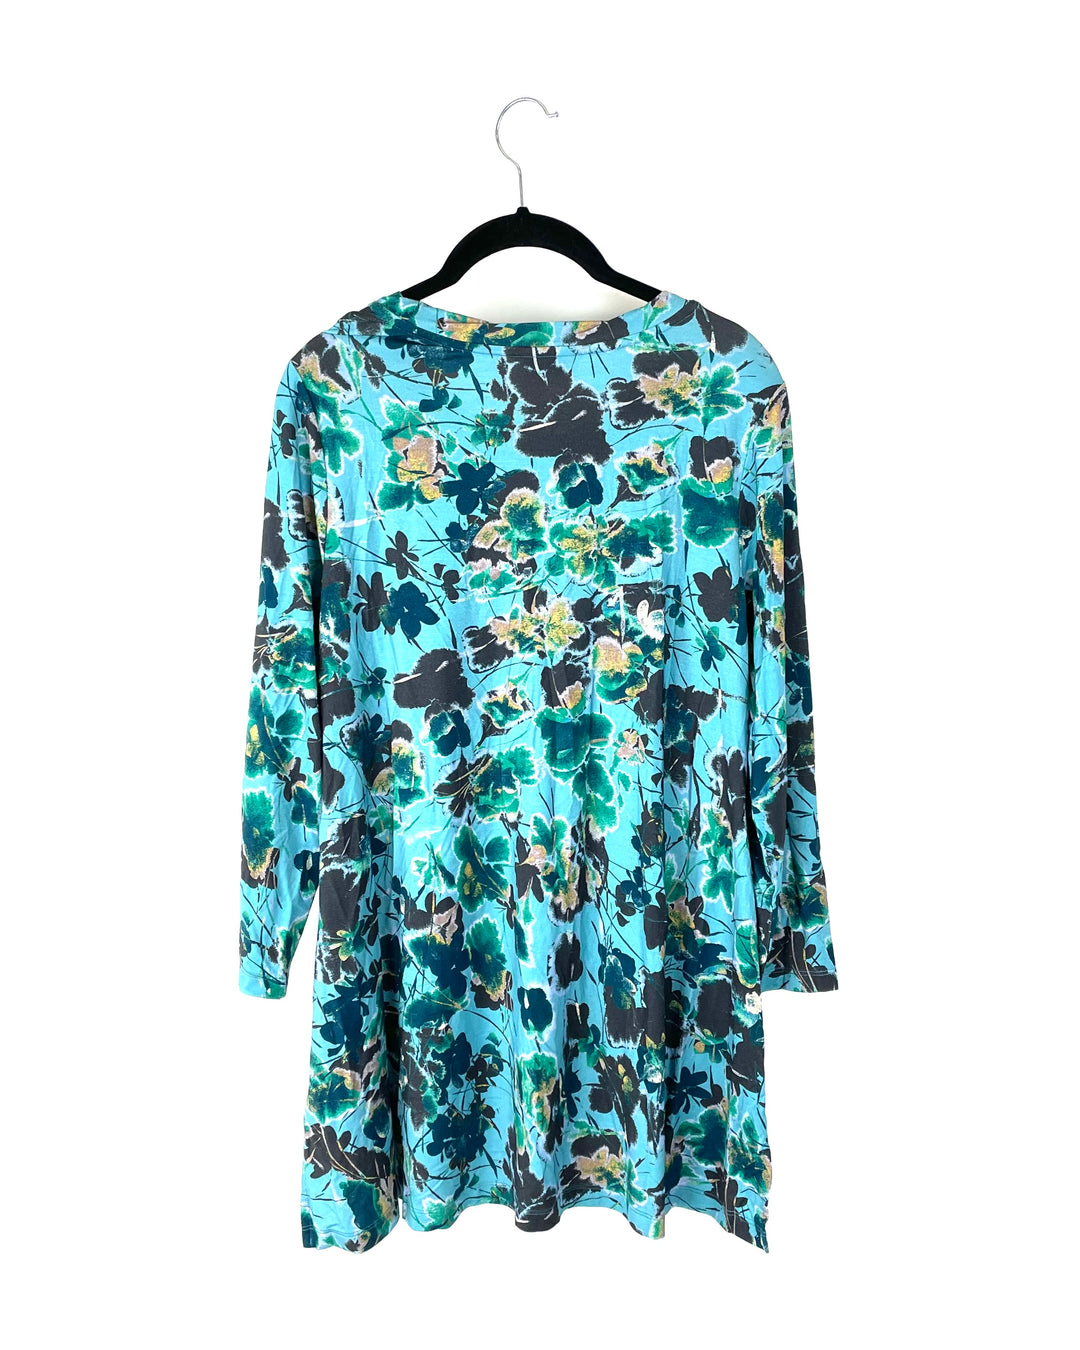 Blue Floral Long Sleeve Top - Small